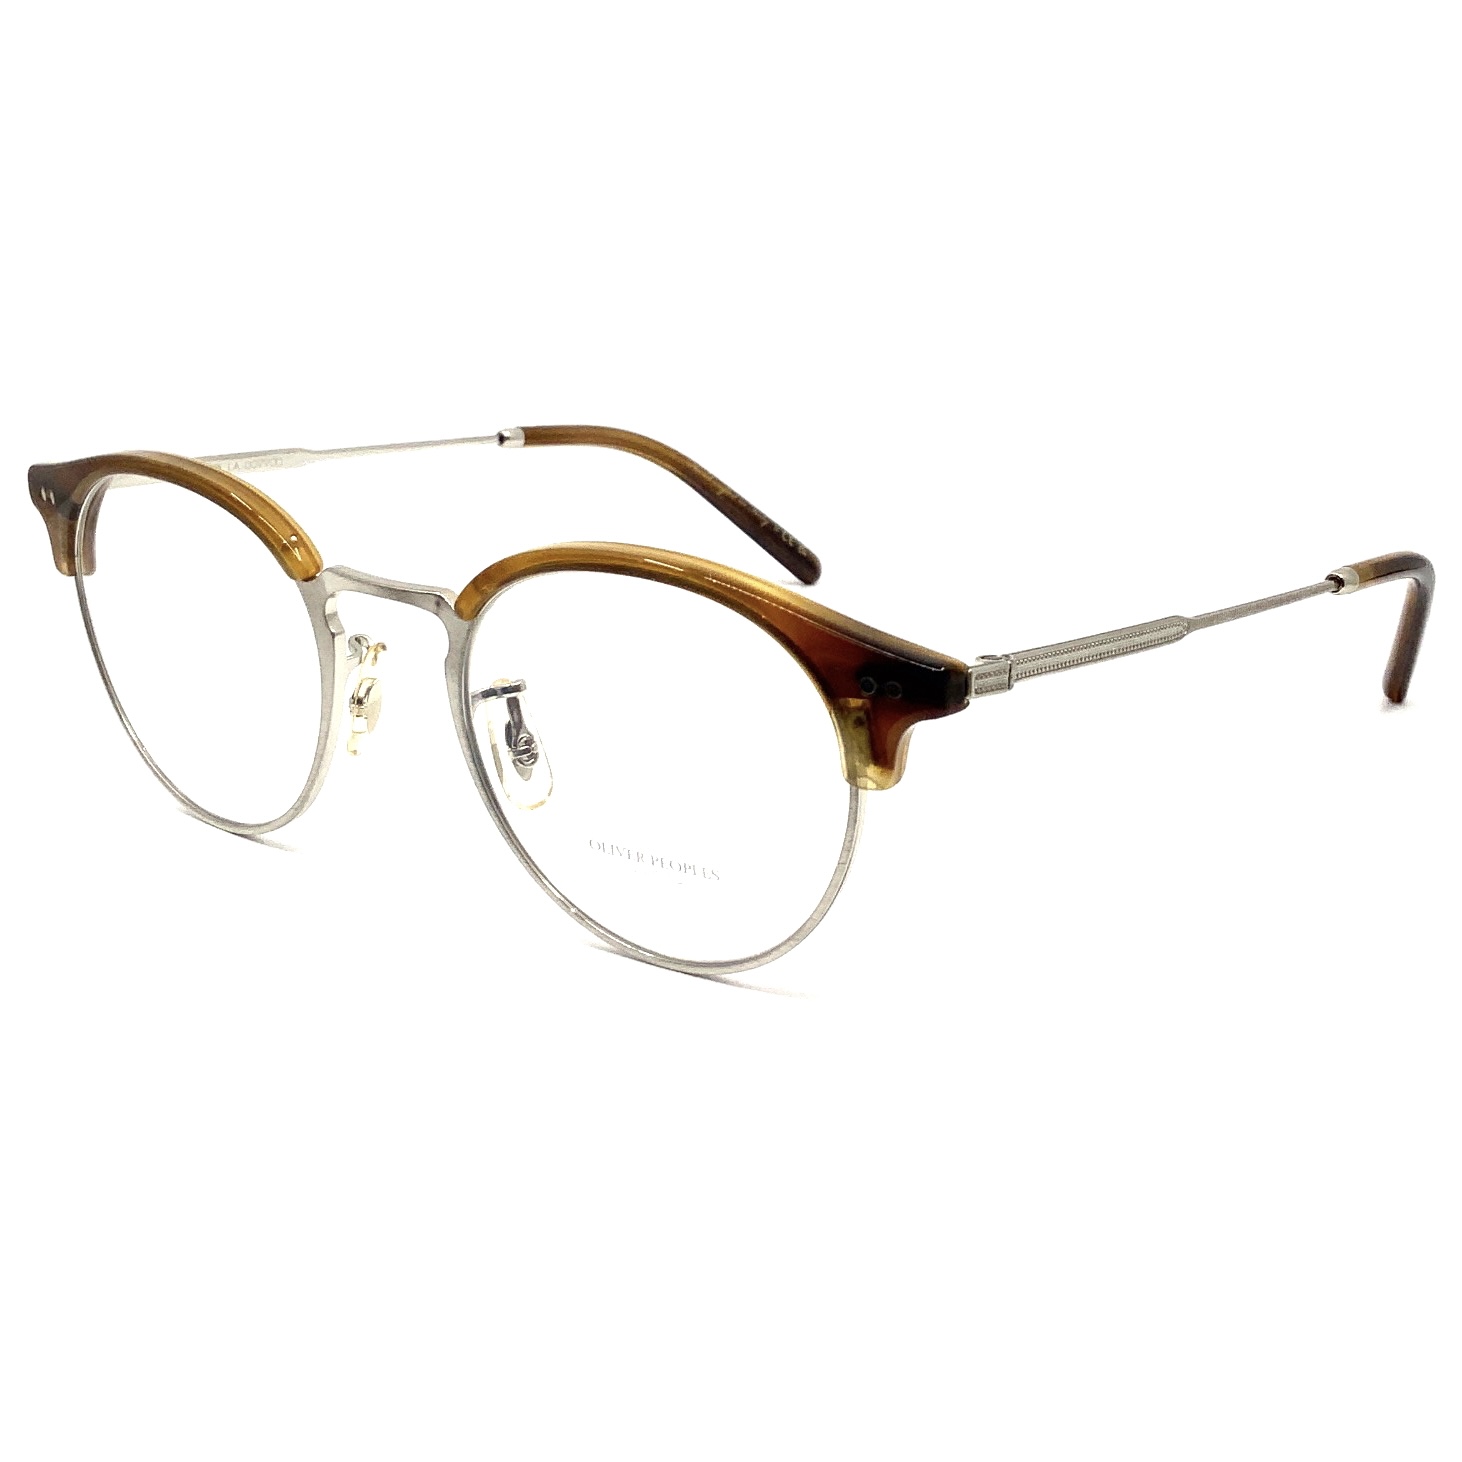 【OLIVER PEOPLES】 REILAND 調光レンズフレーム形ブロー